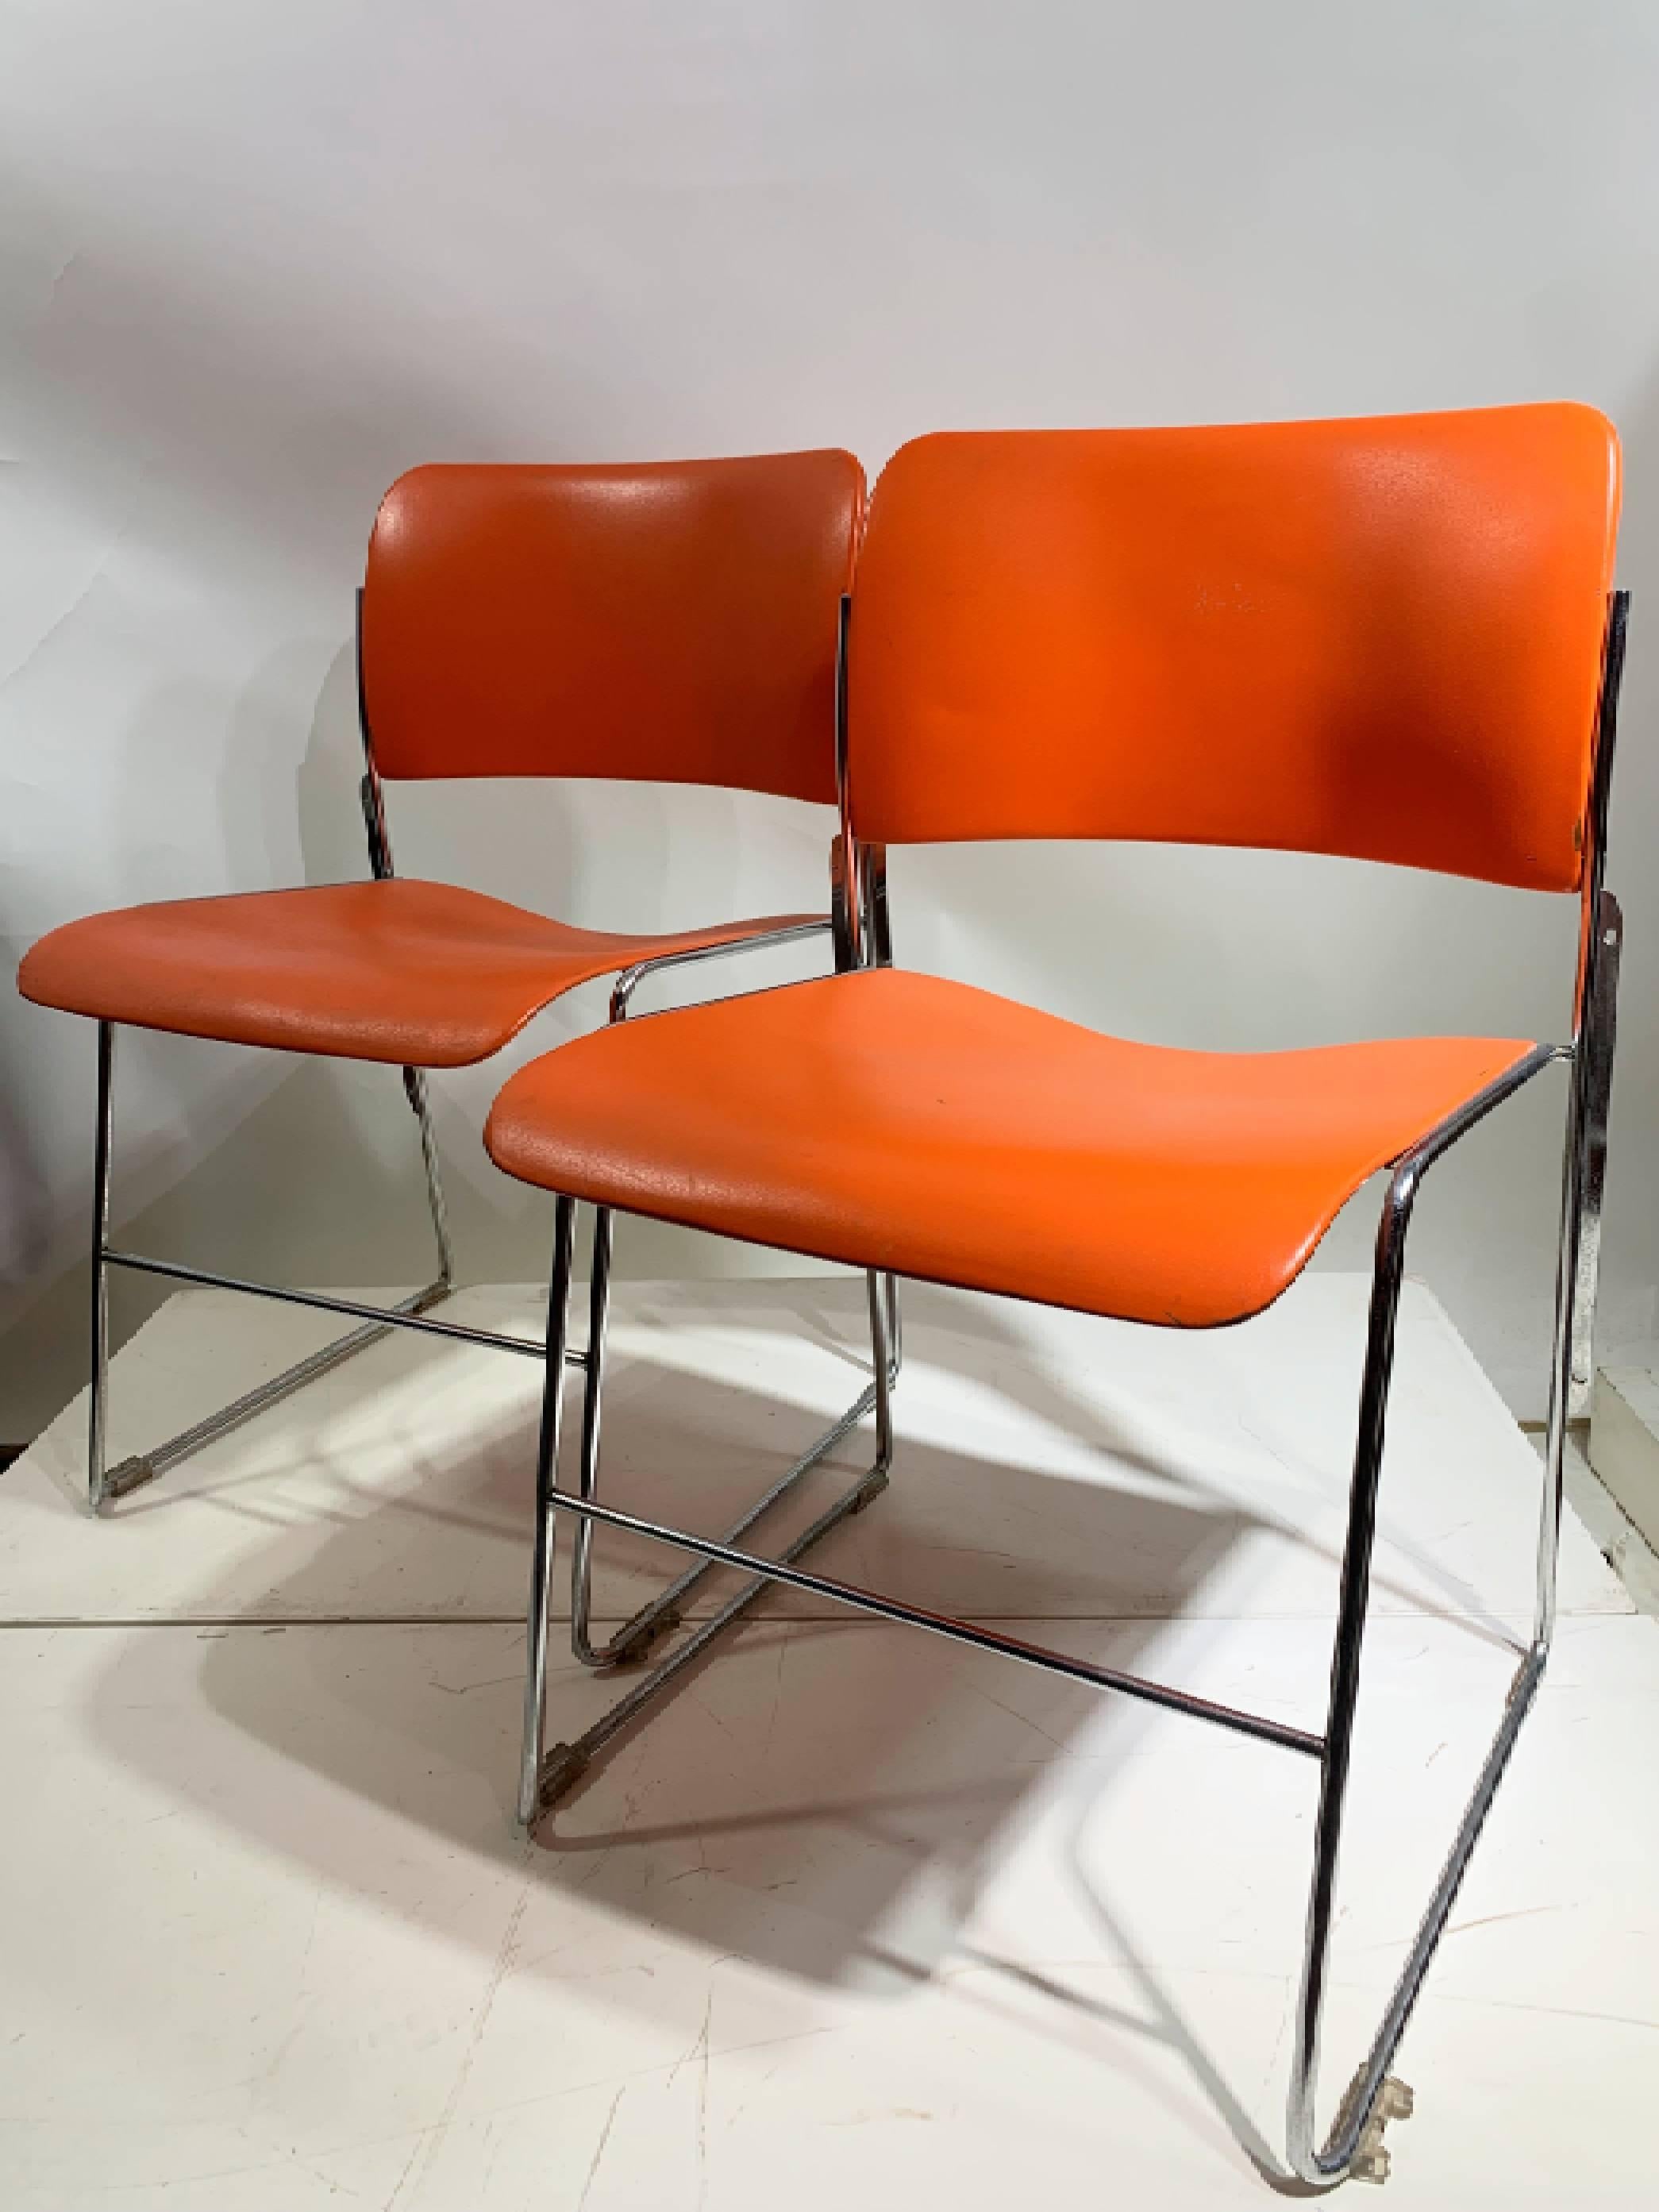 The 40/4 Chair, a timeless masterpiece designed by David Rowland and crafted by the renowned General Fireproofing Company. This iconic chair is celebrated for its exceptional design, which allows 40 chairs to be stacked within 4 feet of space,